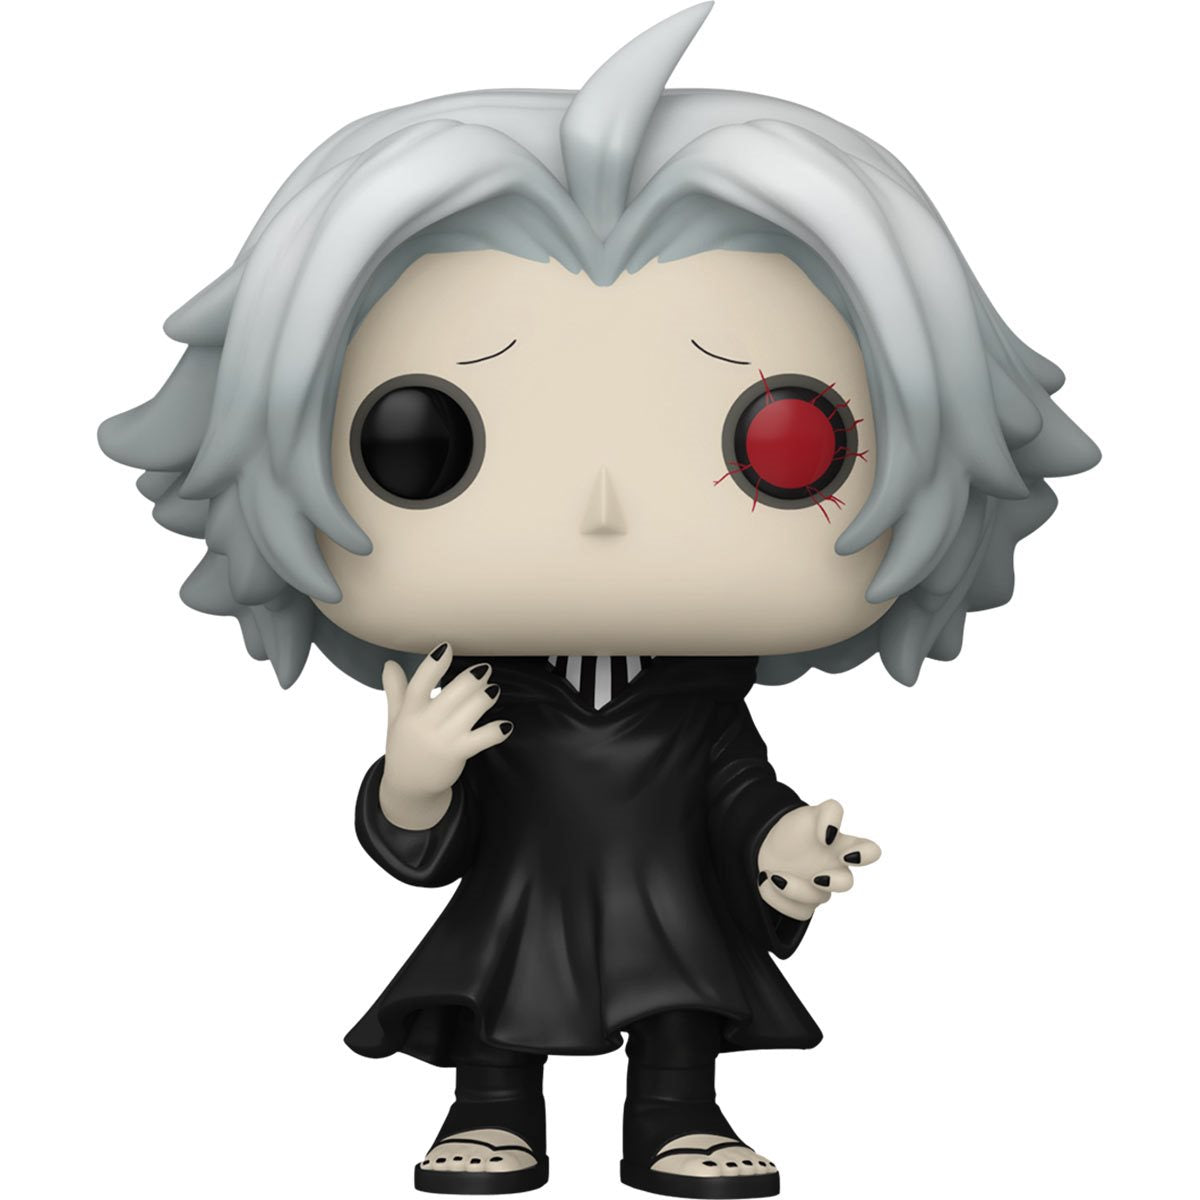 Funko Pop Animation: Tokyo Ghoul Re - Owl